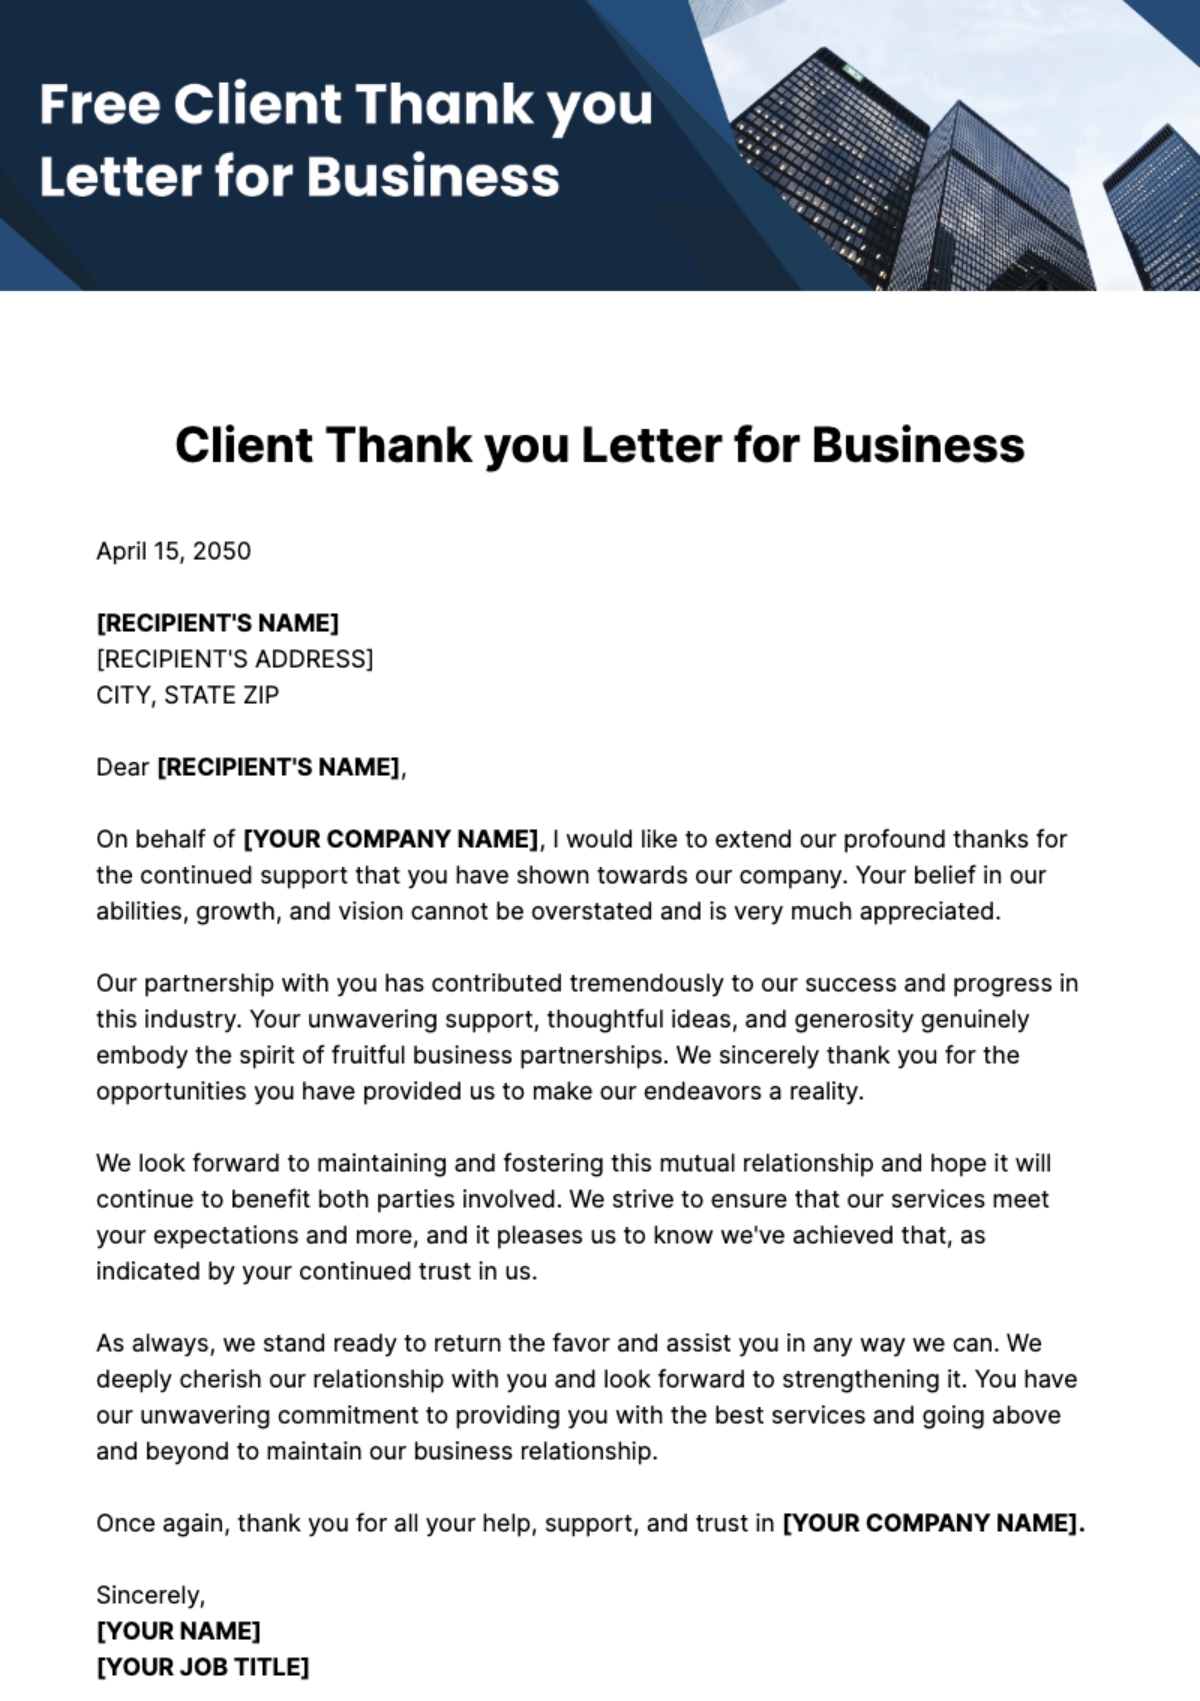 Free Client Thank you Letter for Business Template